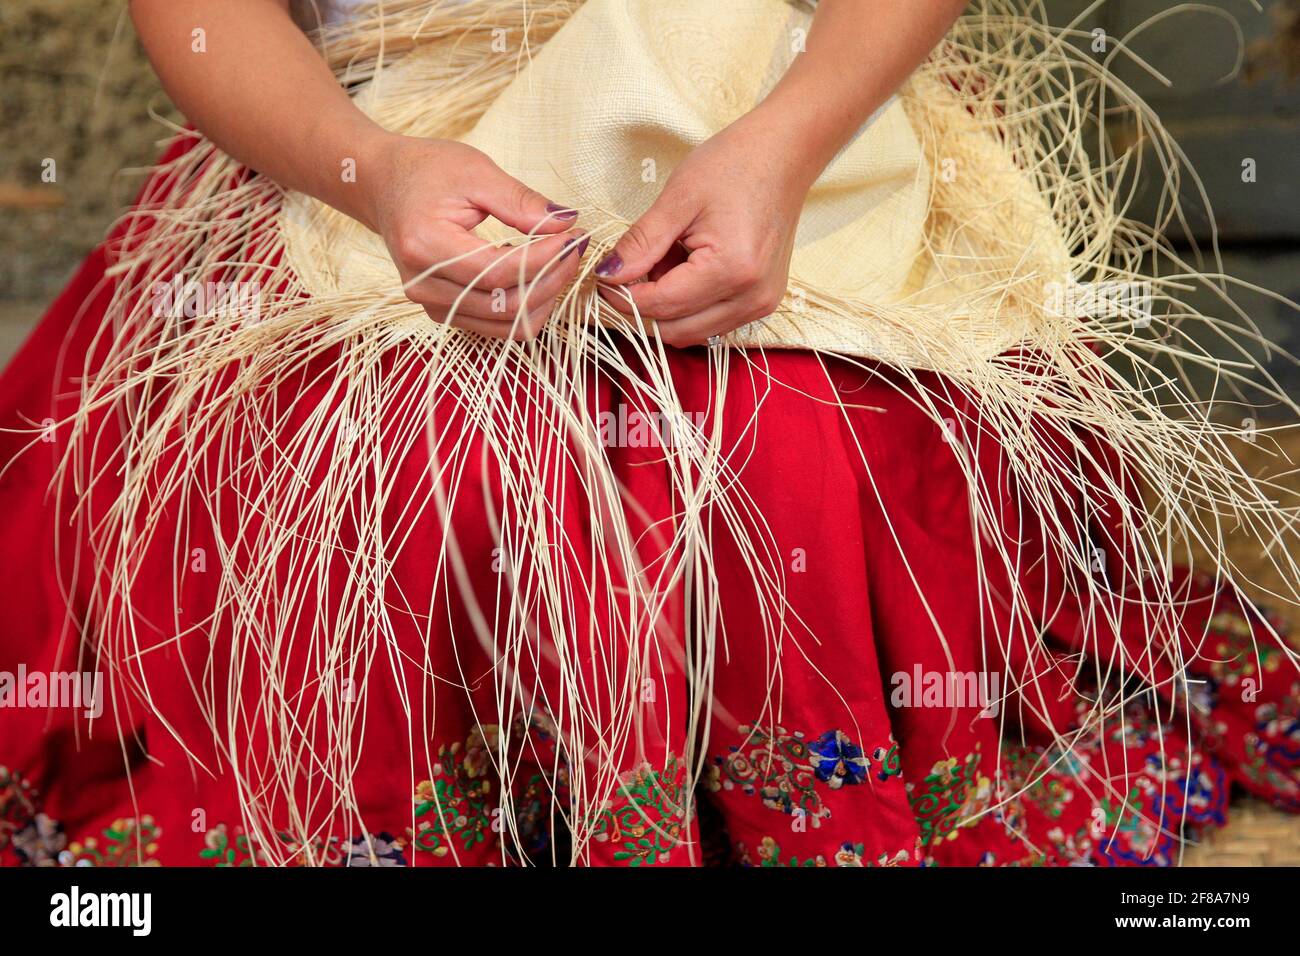 Woman's Hands Weaving a Straw Panama Hat in Cuenca, Ecuador, South America Stock Photo